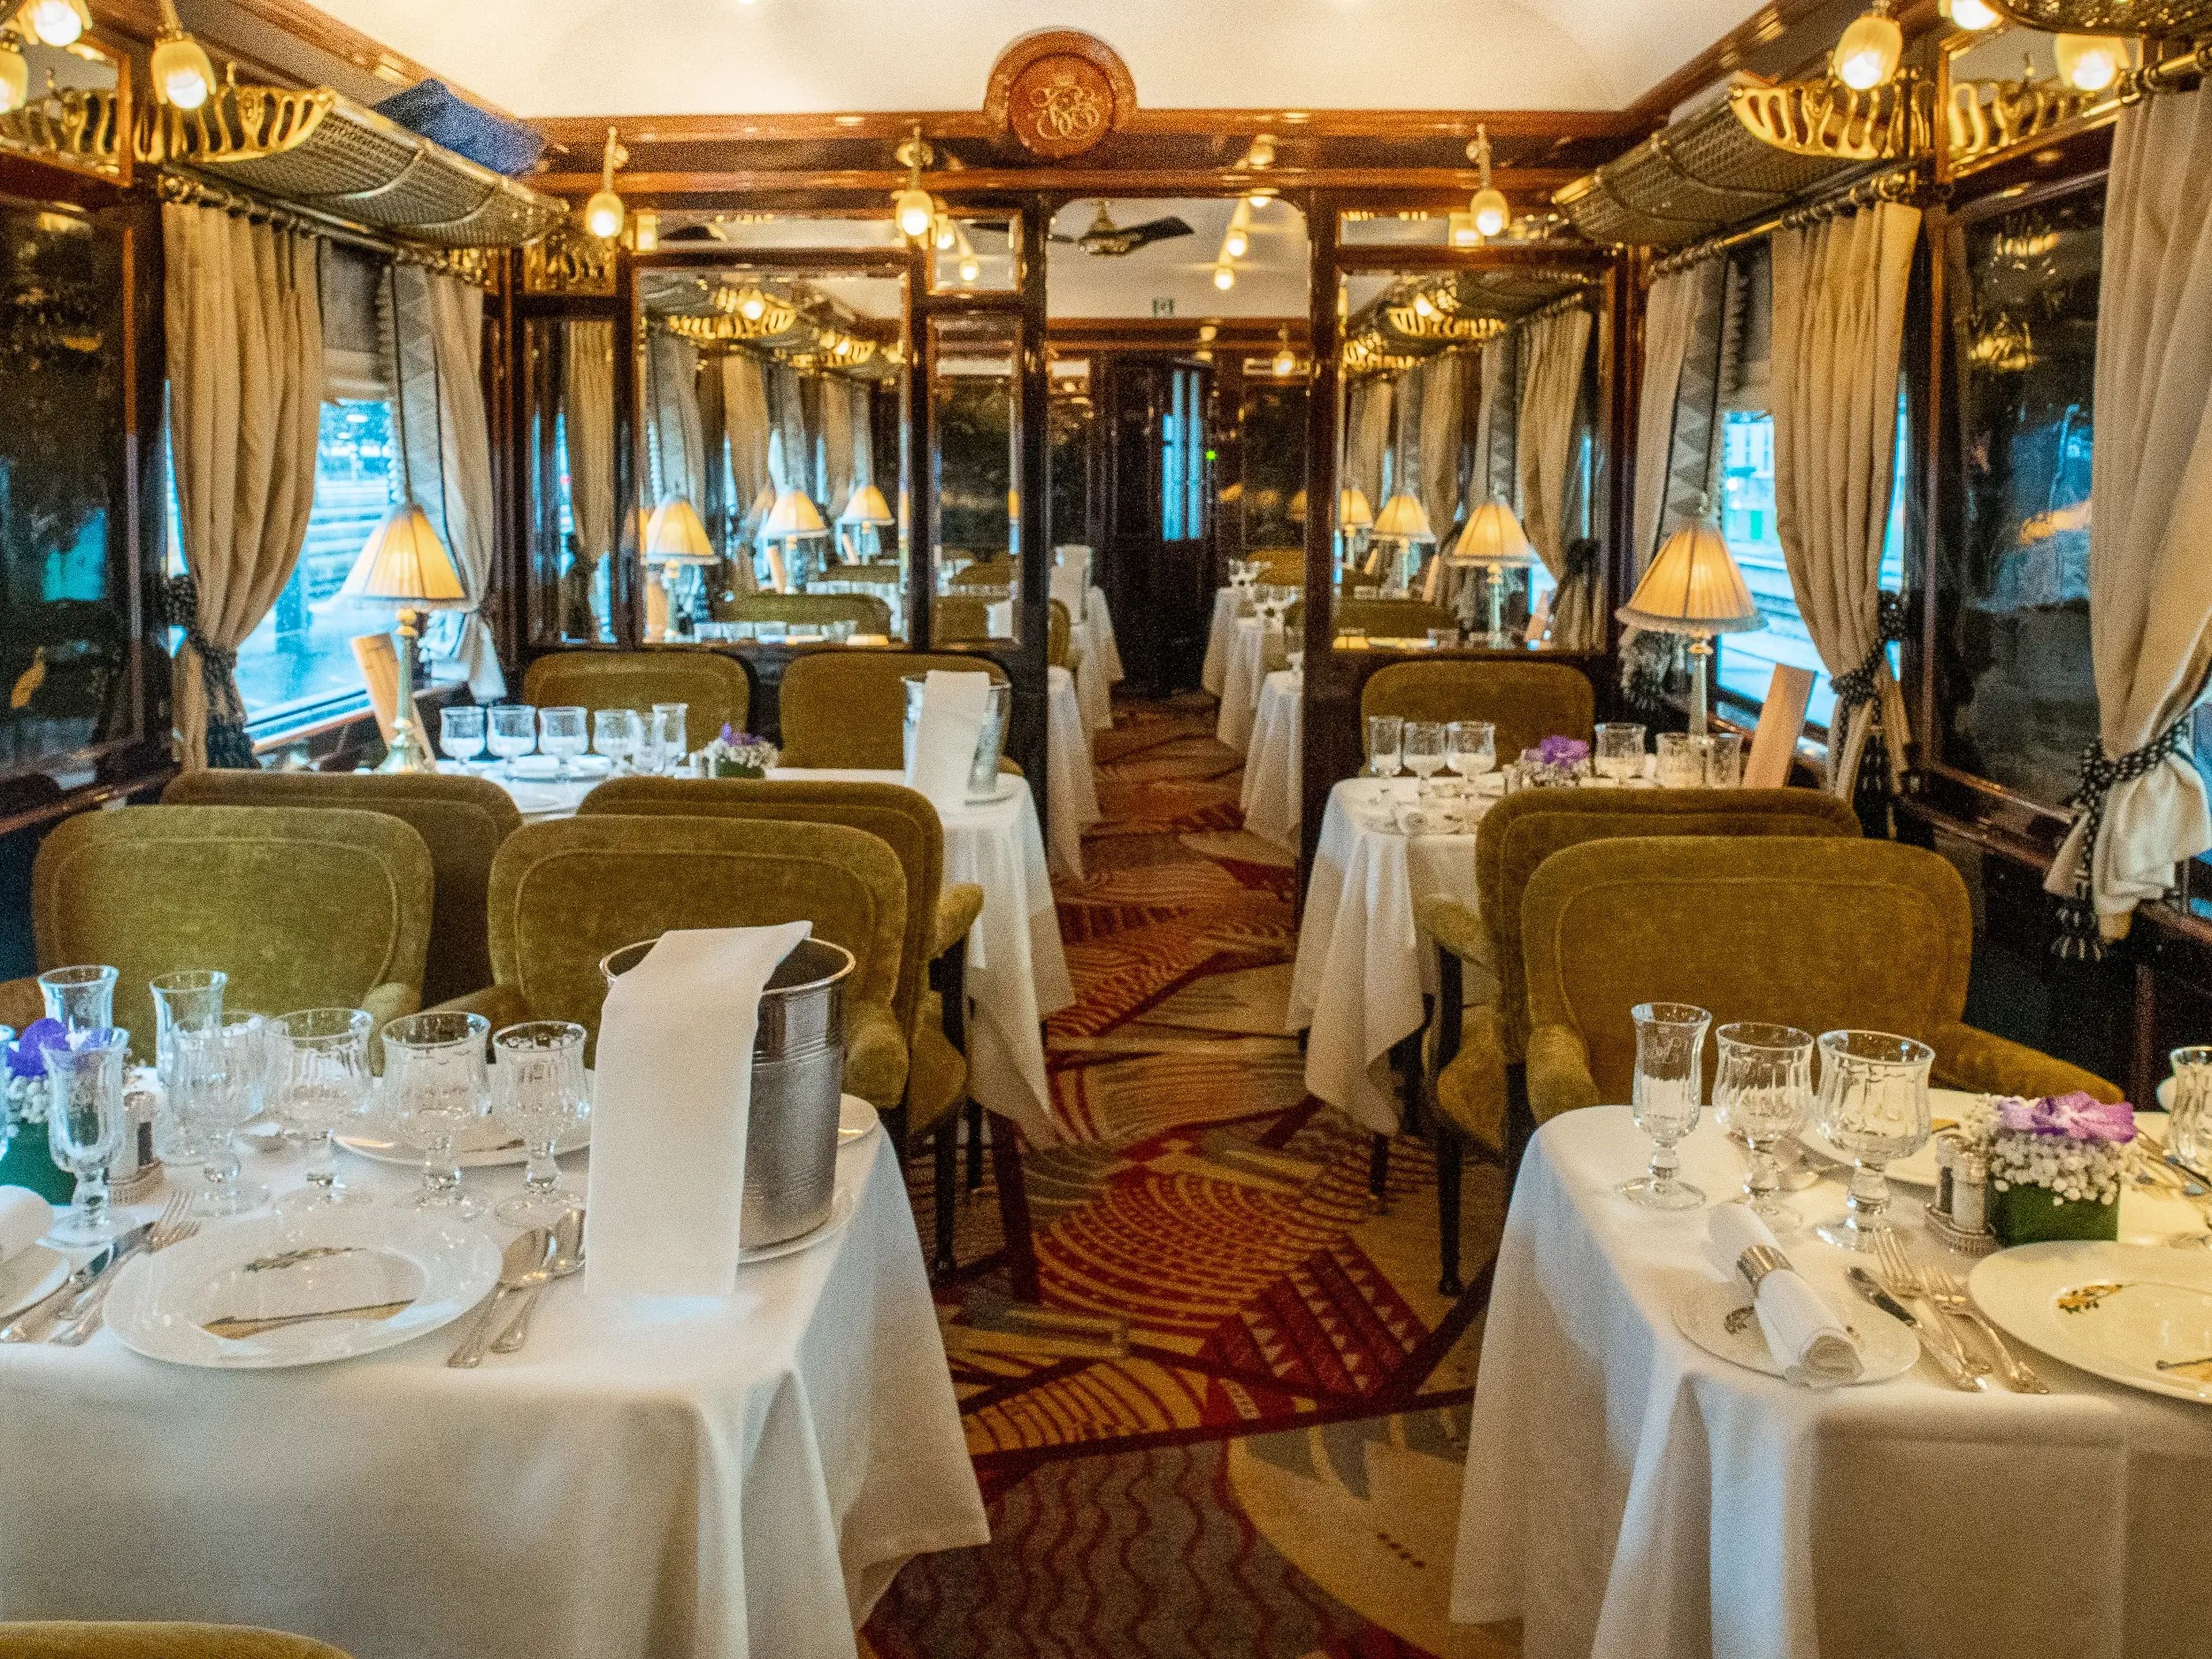 Inside a train dining car with velvet, beige seats, a warm-colored carpet, and tables with white cloths, dishes, and silverware